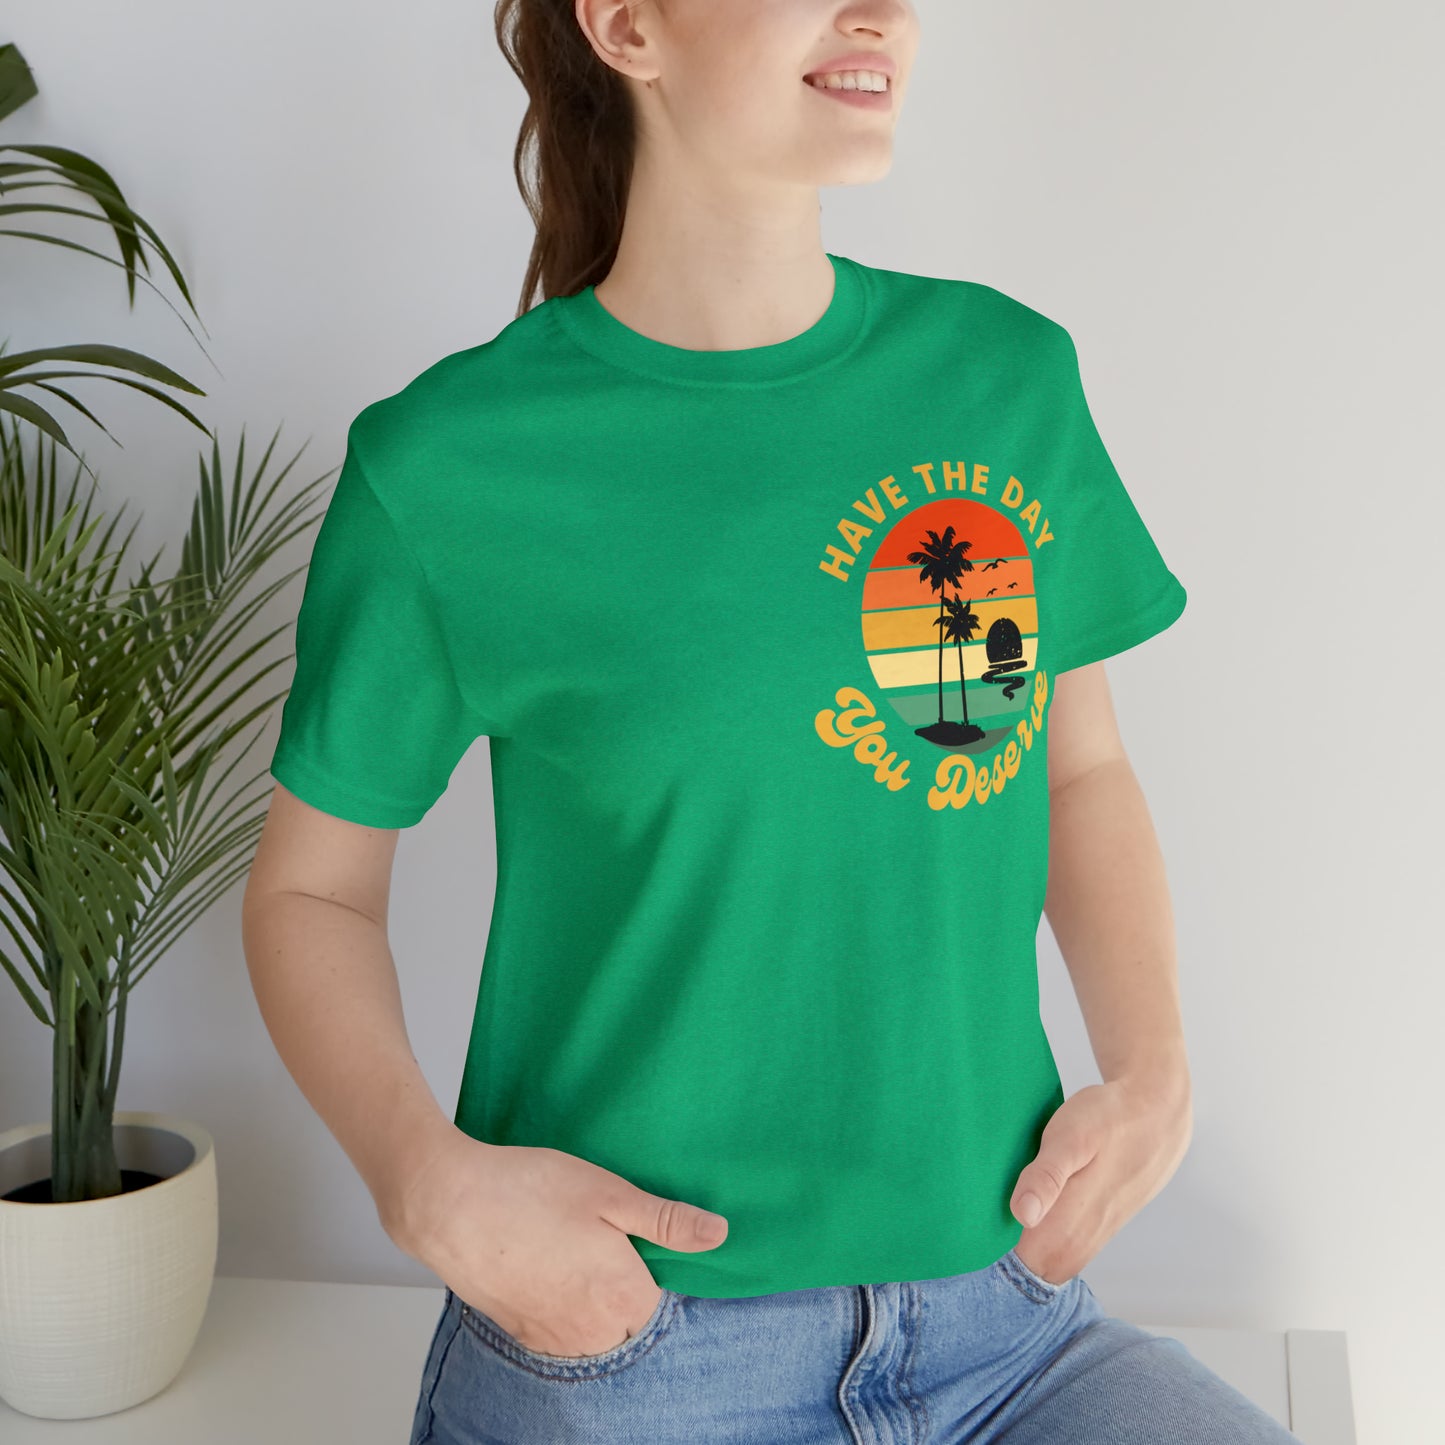 Have the Day You Deserve Shirt, Inspirational Graphic Tee, Motivational Tee, Positive Vibes Shirt, Trendy shirt and Vintage shirt